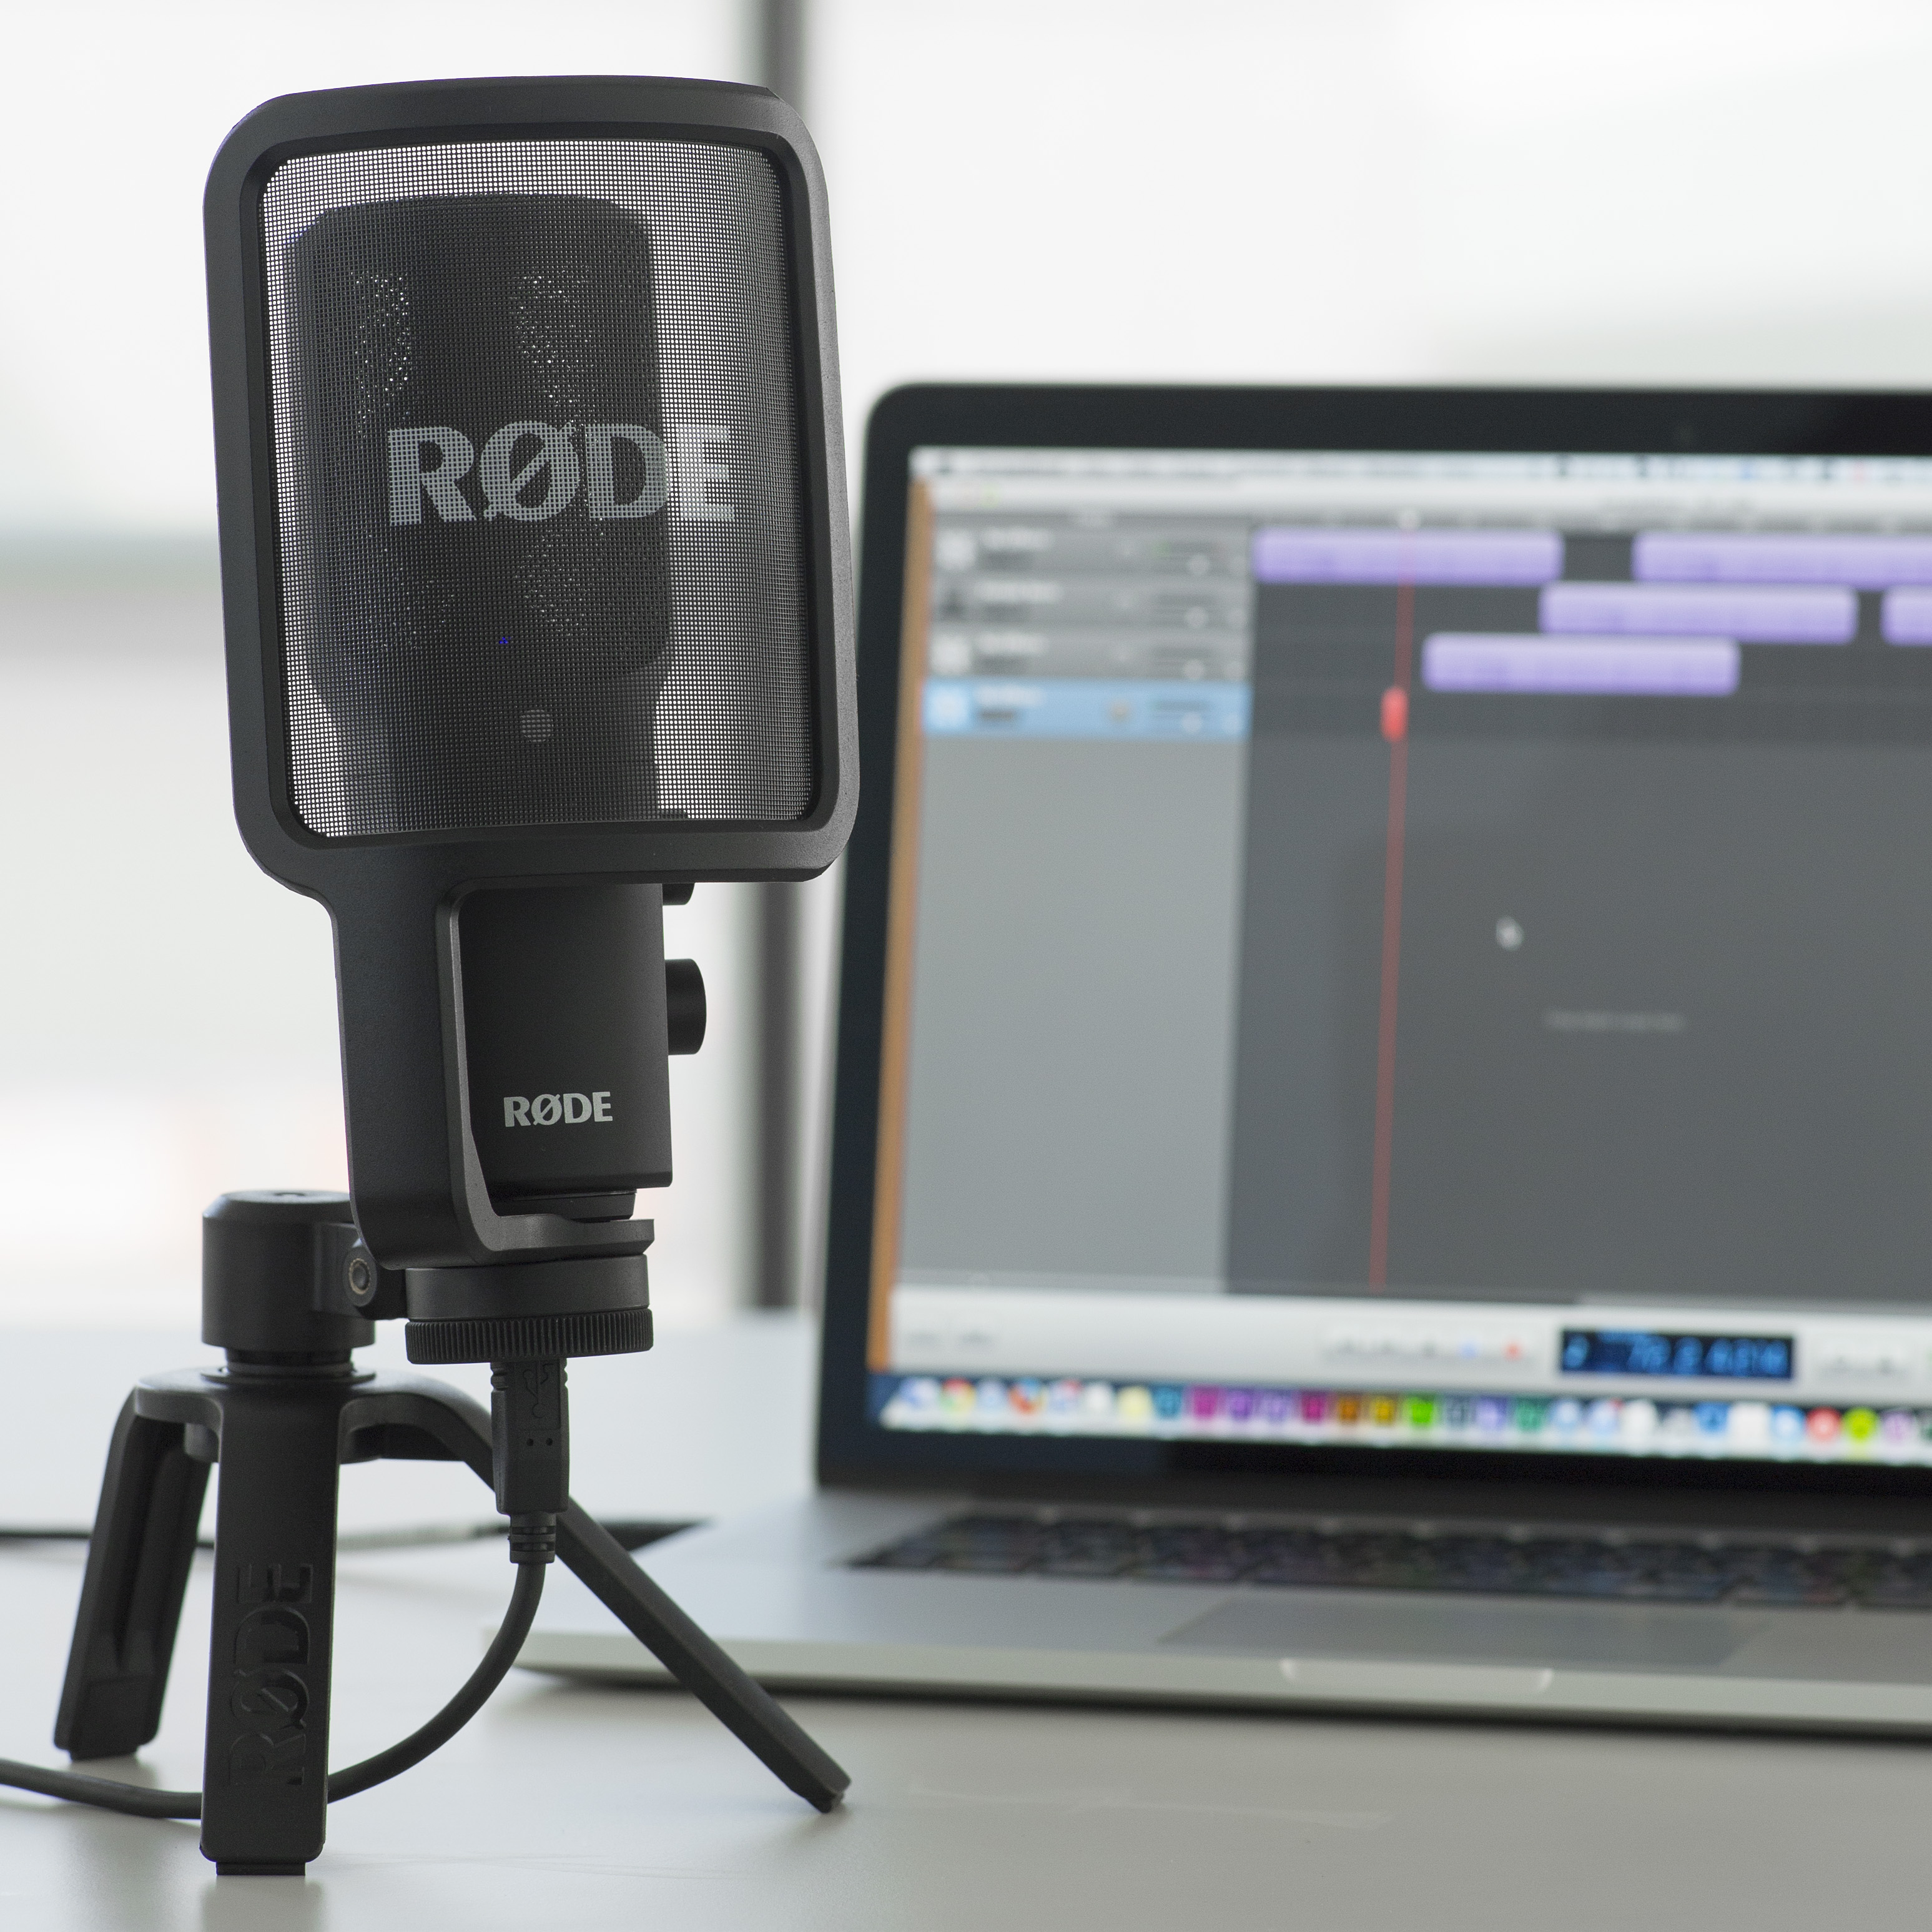 Enjoy Studio-quality recording on the go with the new RØDE NT-USB 14